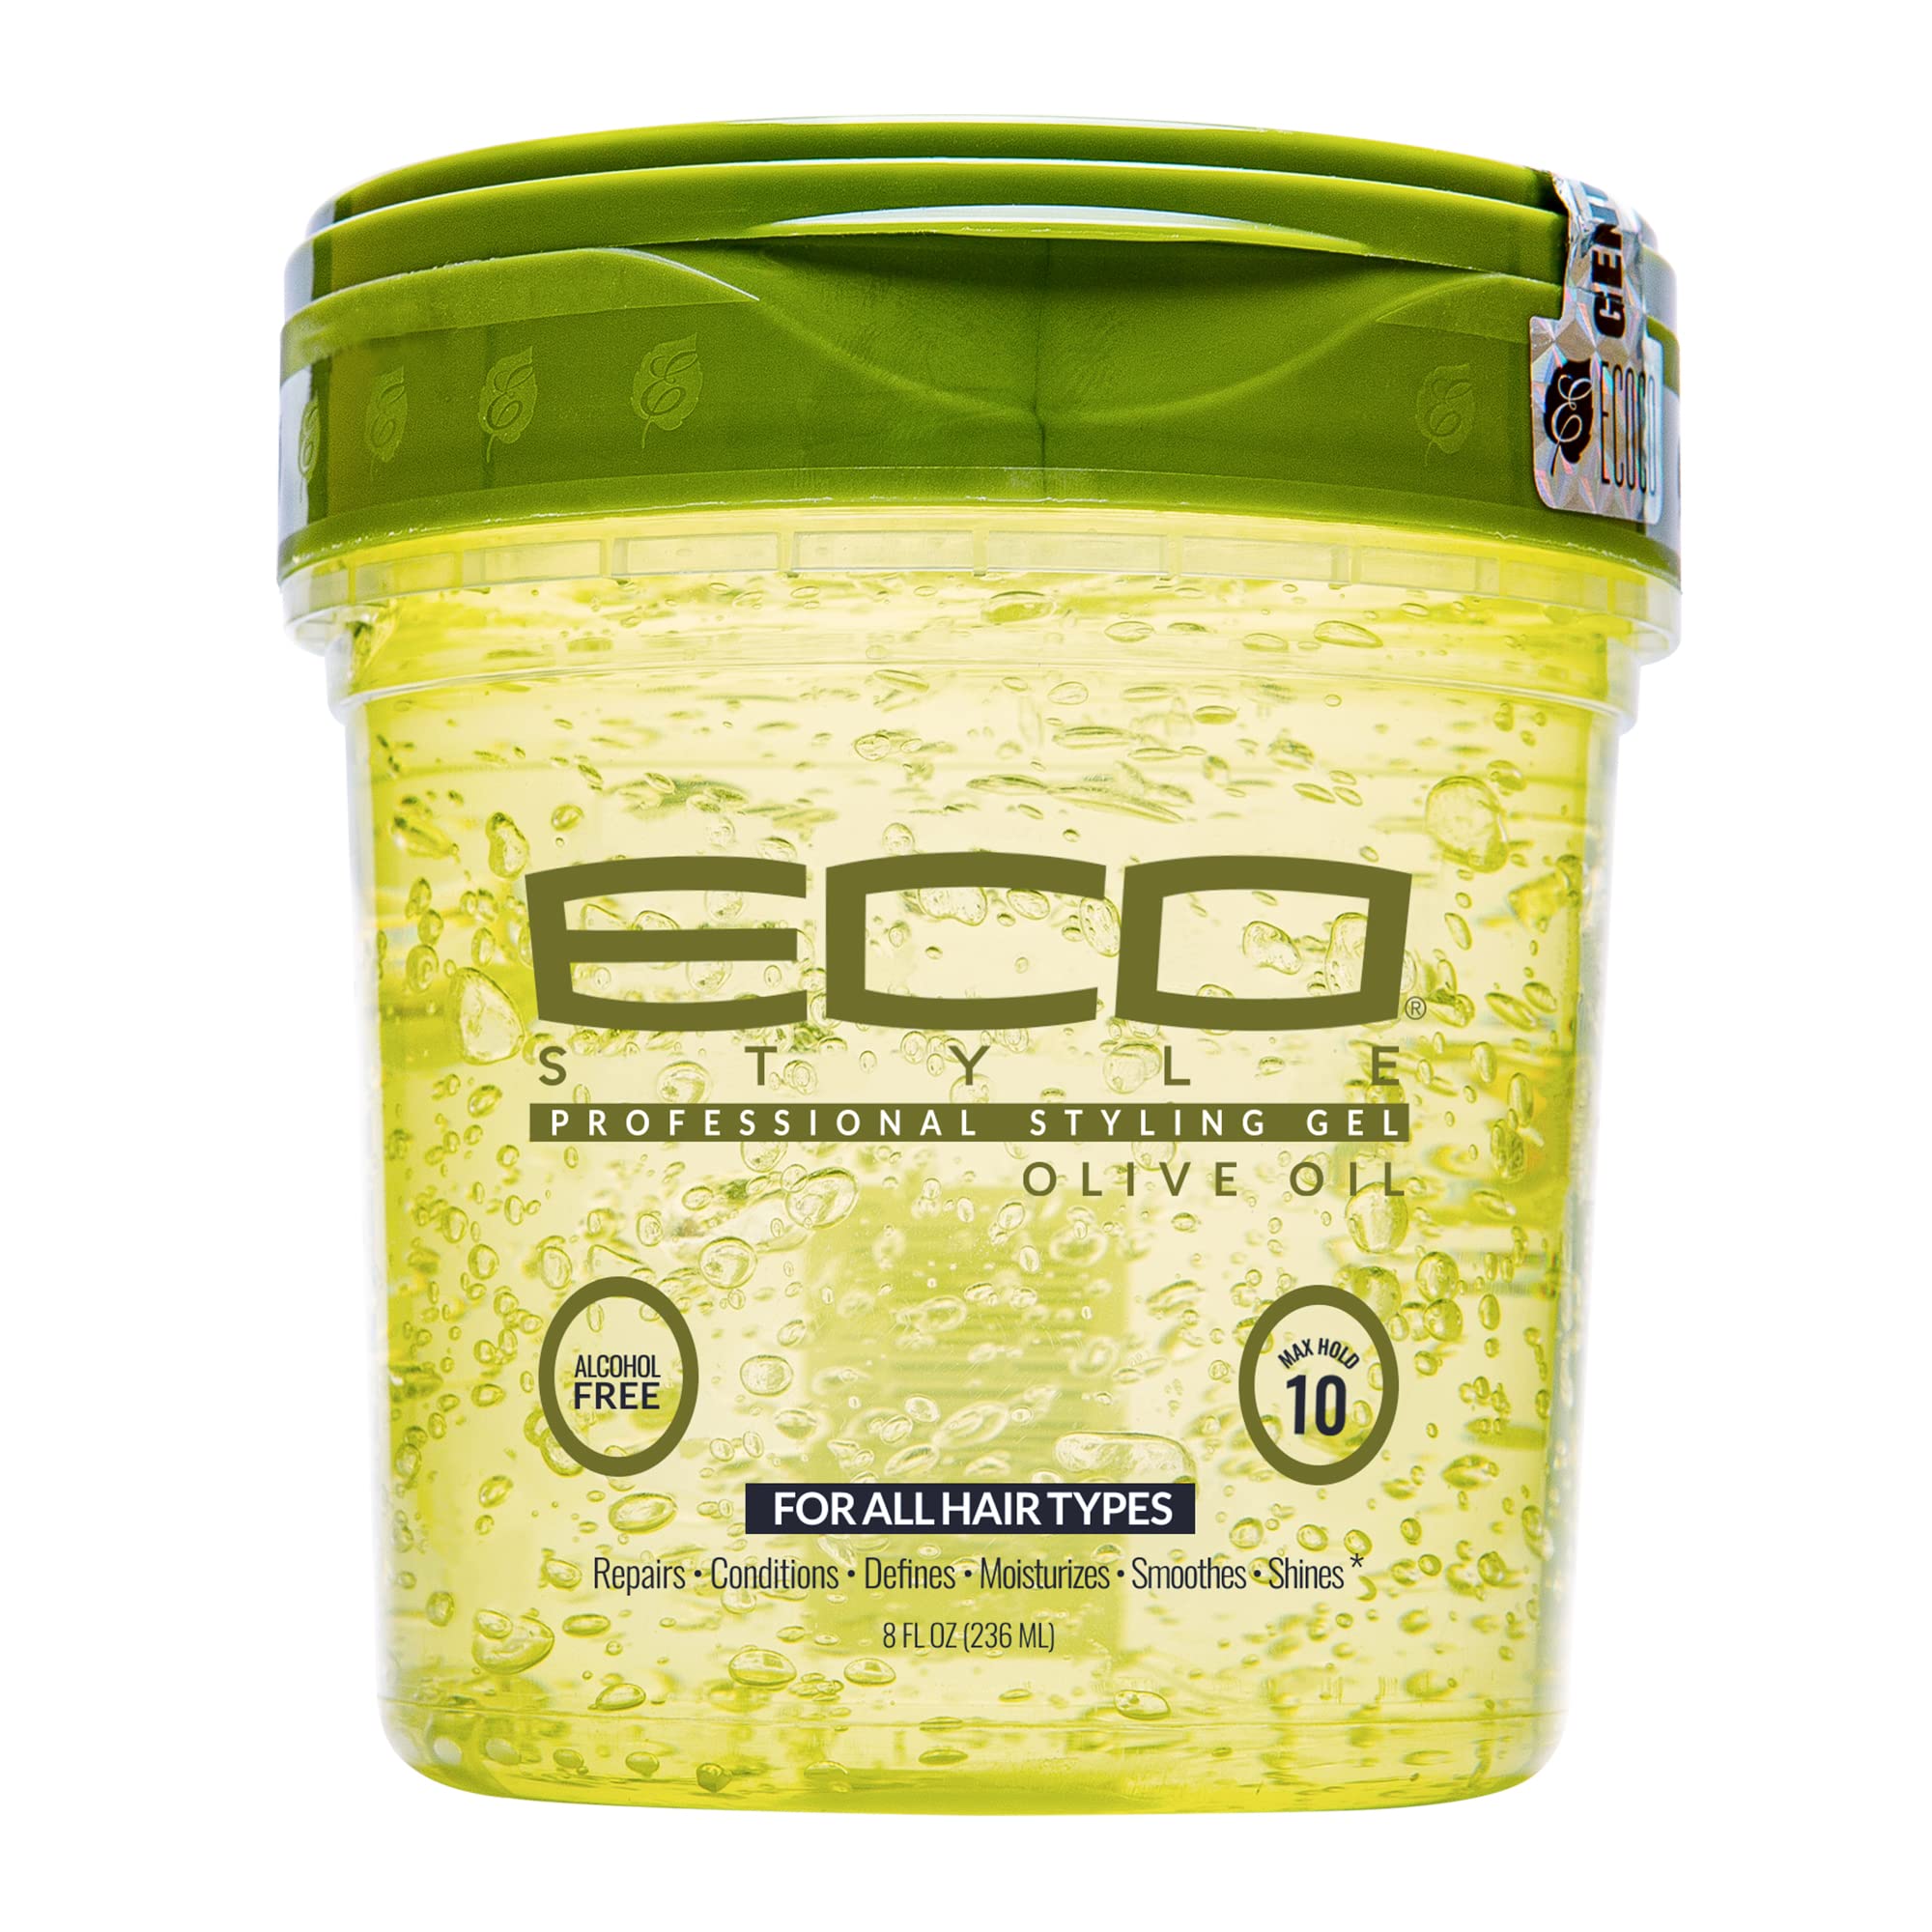 Eco Style Gel Olive Oil Styling Gel - Adds Shine and Tames Split